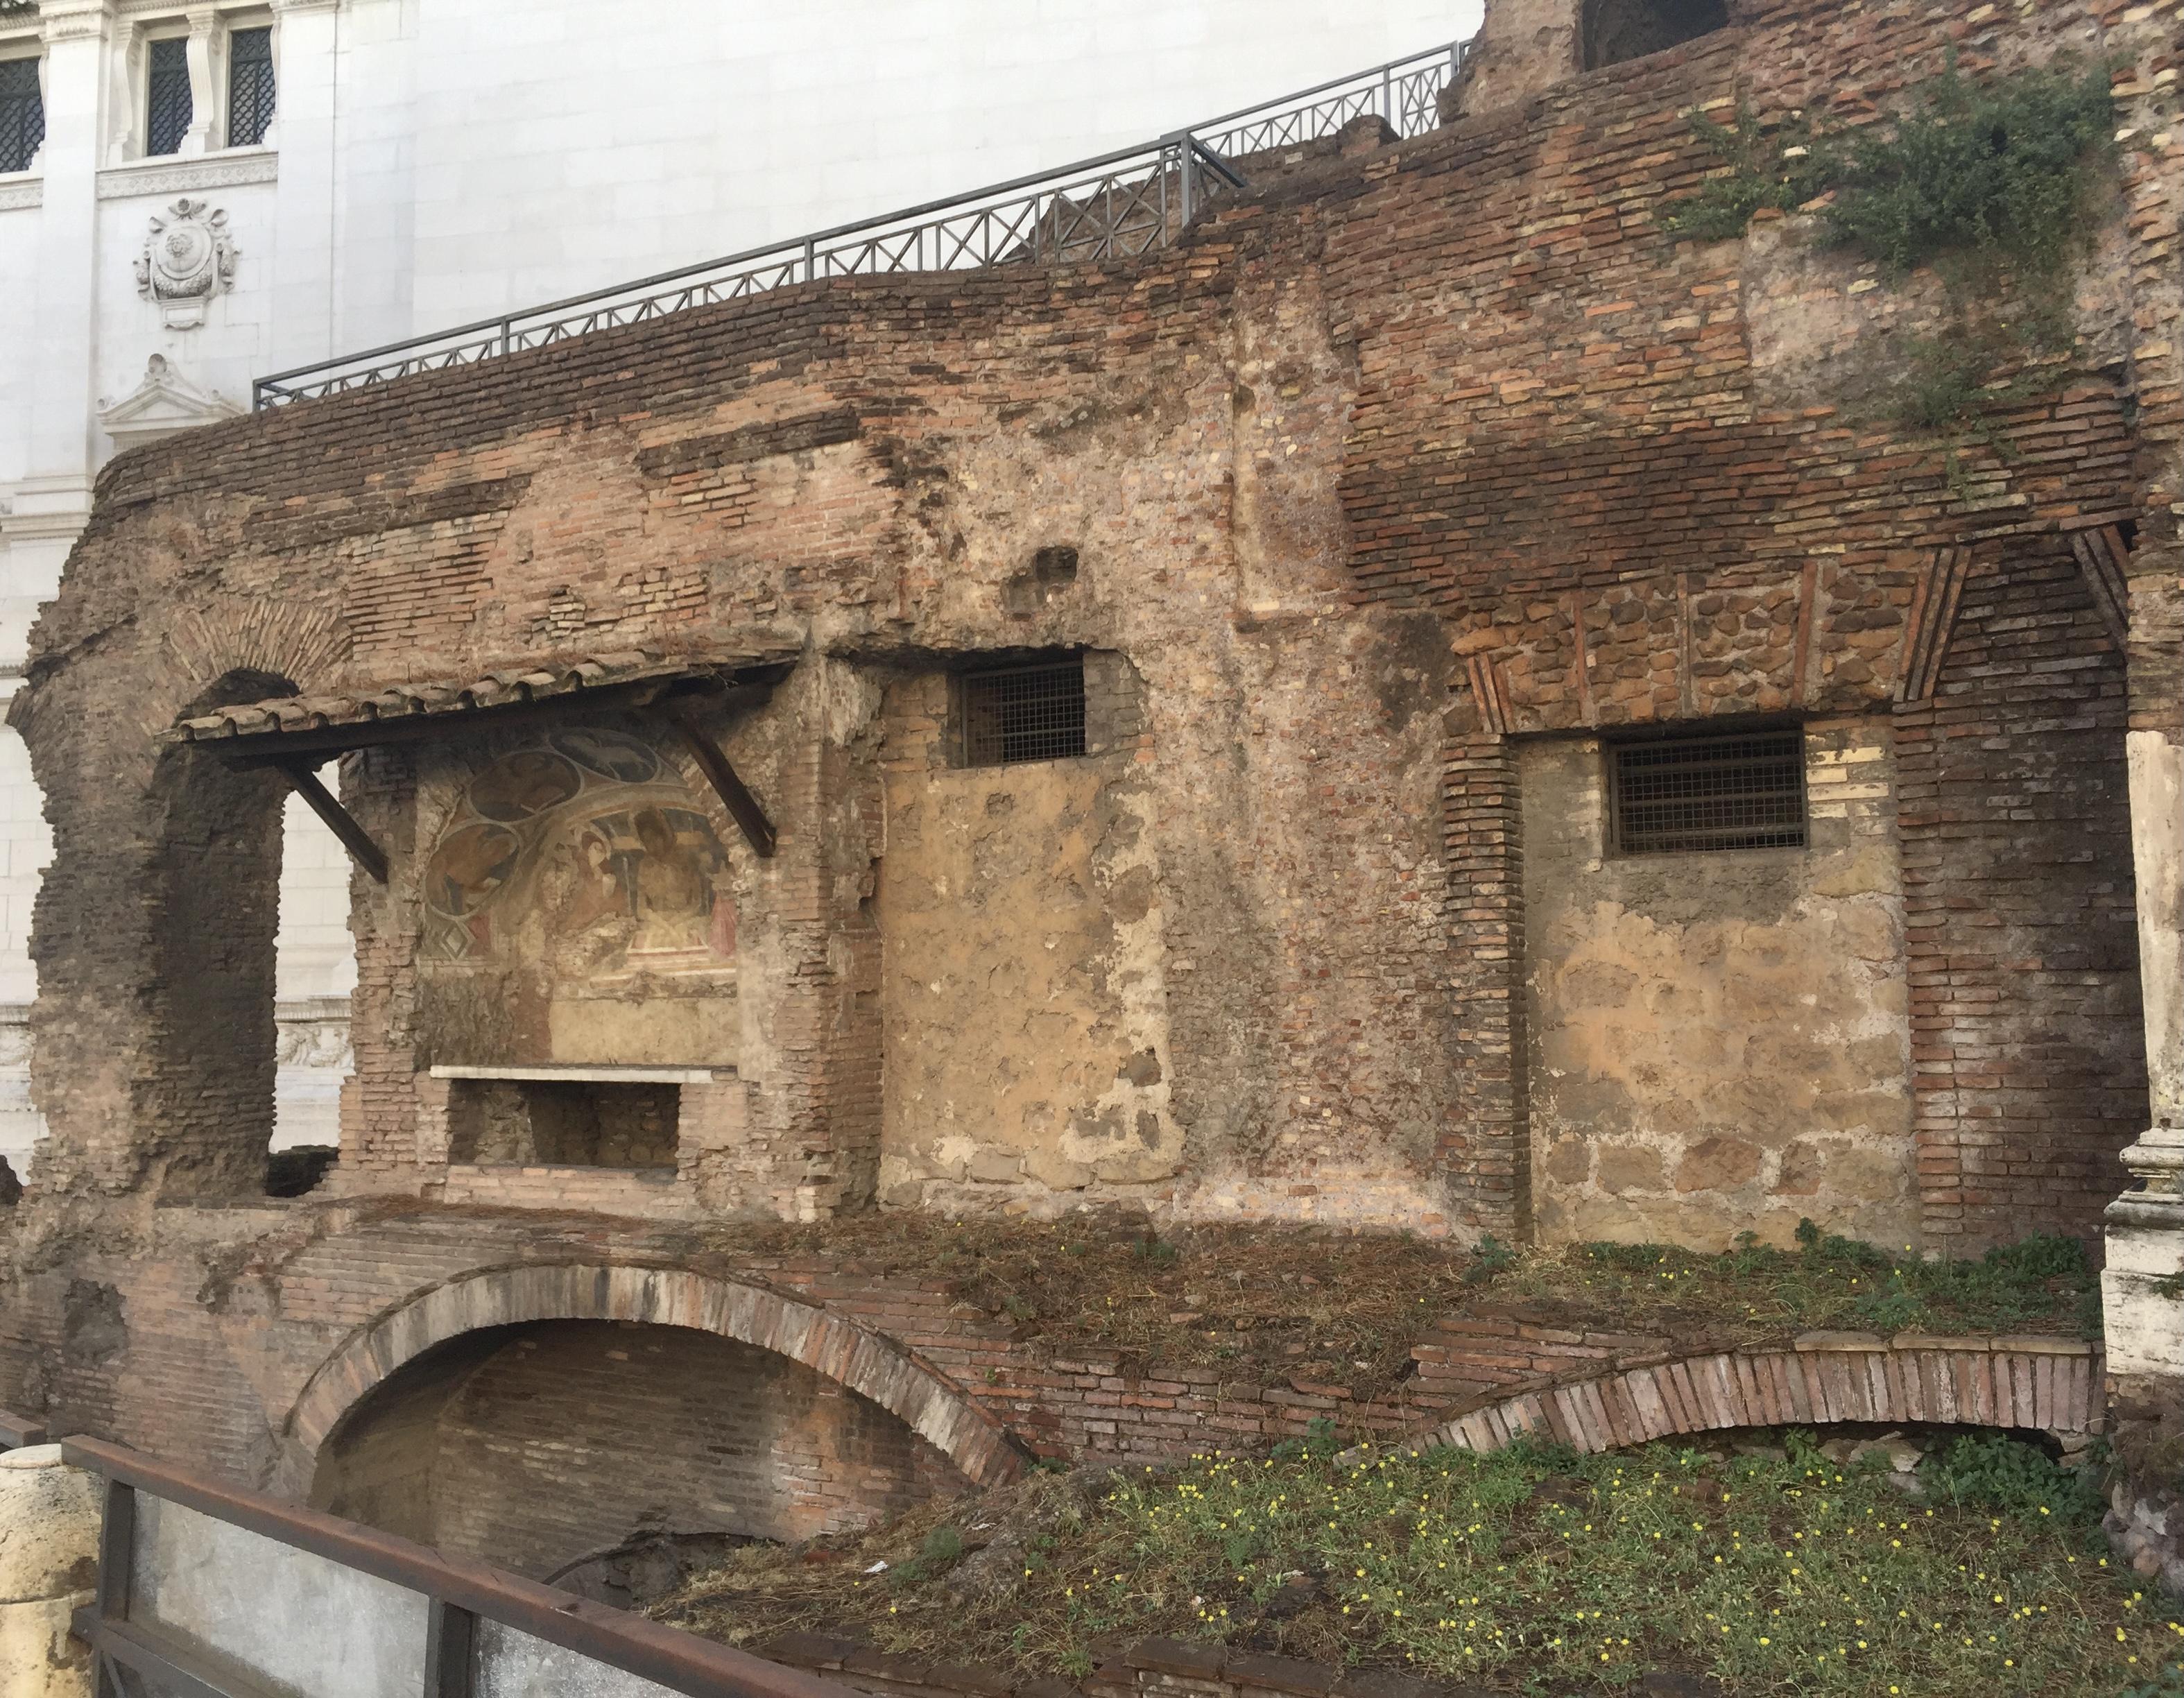 This space contained Roman shopfronts, while doubling as the ground floor of a five-story apartment complex with the capacity for 380 tenants. Although built circa 100 CE, it was spared medieval destruction when incorporated into the church of San Biagio de Mercato in the 11th century. Rome, Italy.